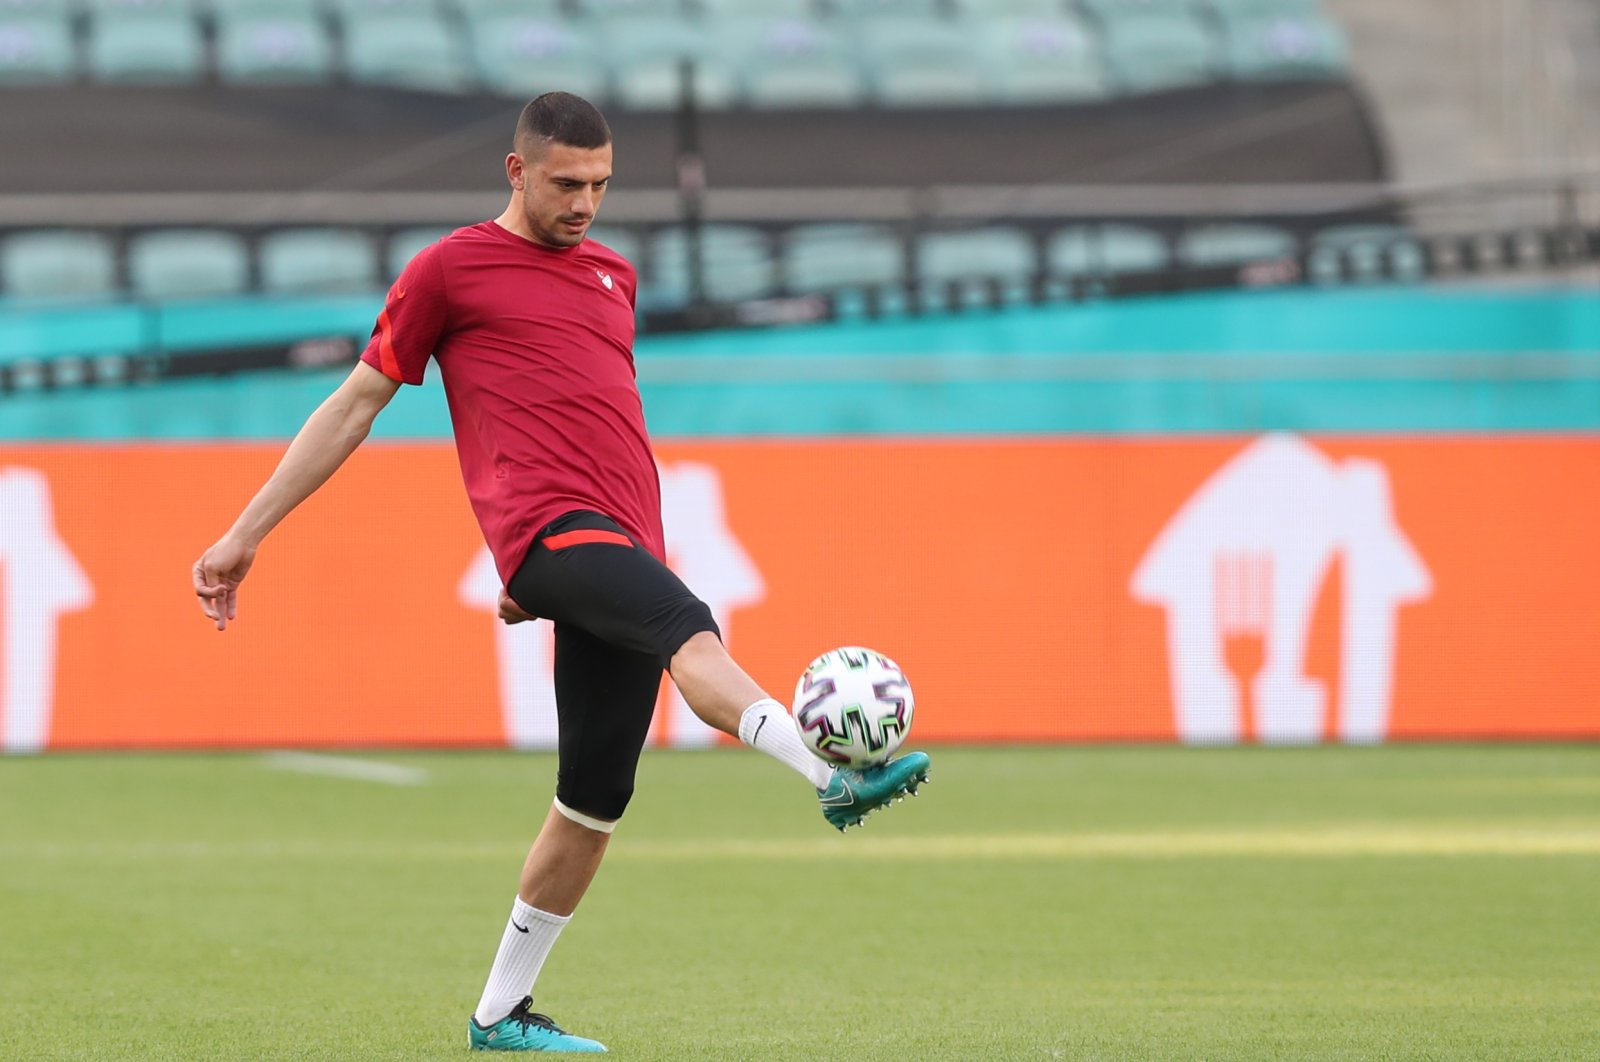 Merih Demiral of Turkey warms up during a training session during EURO 2020 in Baku, Azerbaijan, 15 June 2021. (EPA Photo)